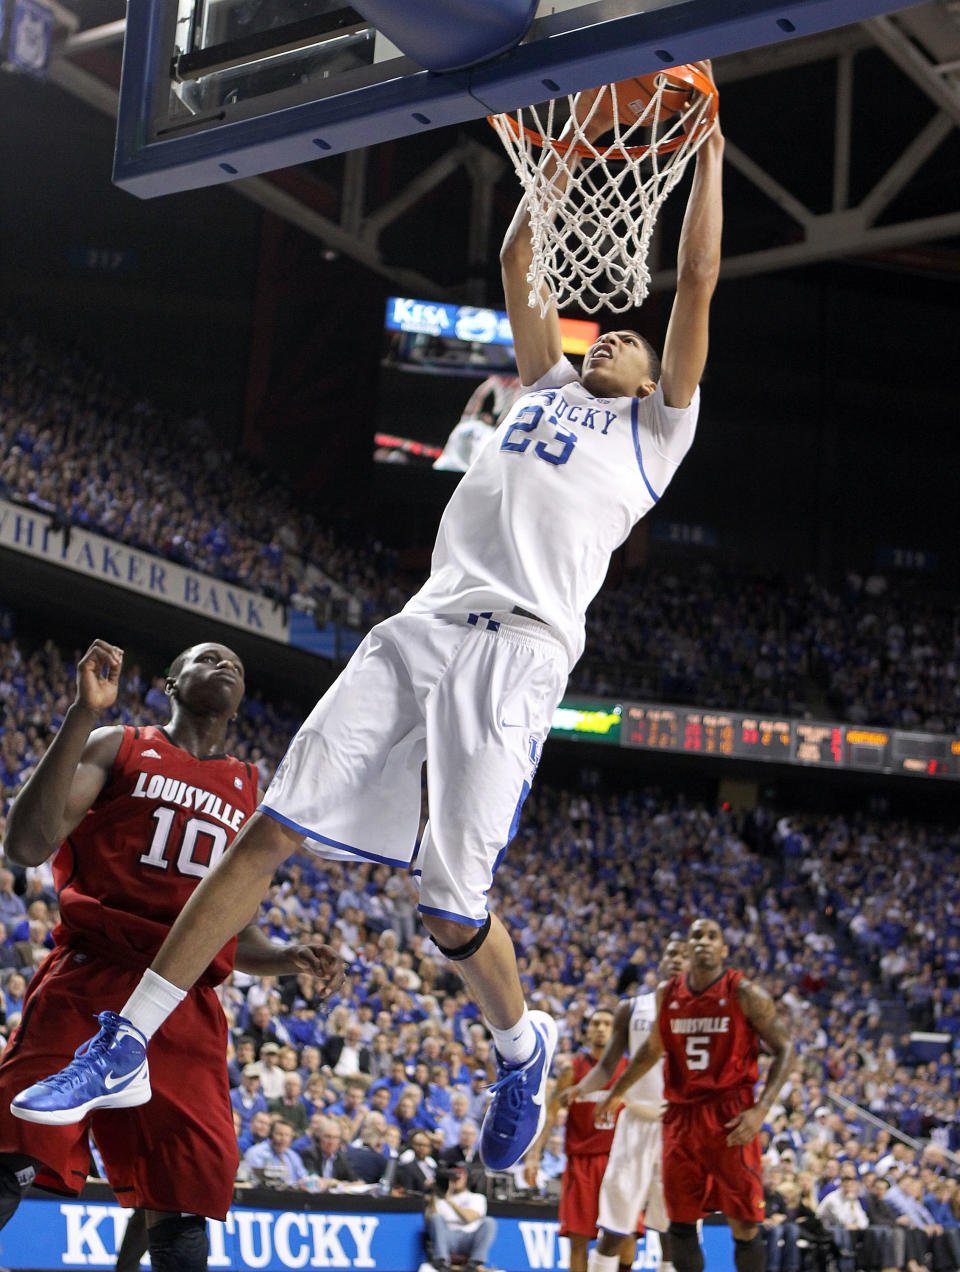 LEXINGTON, KY - DECEMBER 31: Anthony Davis #23 of the Kentucky Wildcats dunks the ball during 69-62 win over the Louisville Cardinals at Rupp Arena on December 31, 2011 in Lexington, Kentucky. (Photo by Andy Lyons/Getty Images)